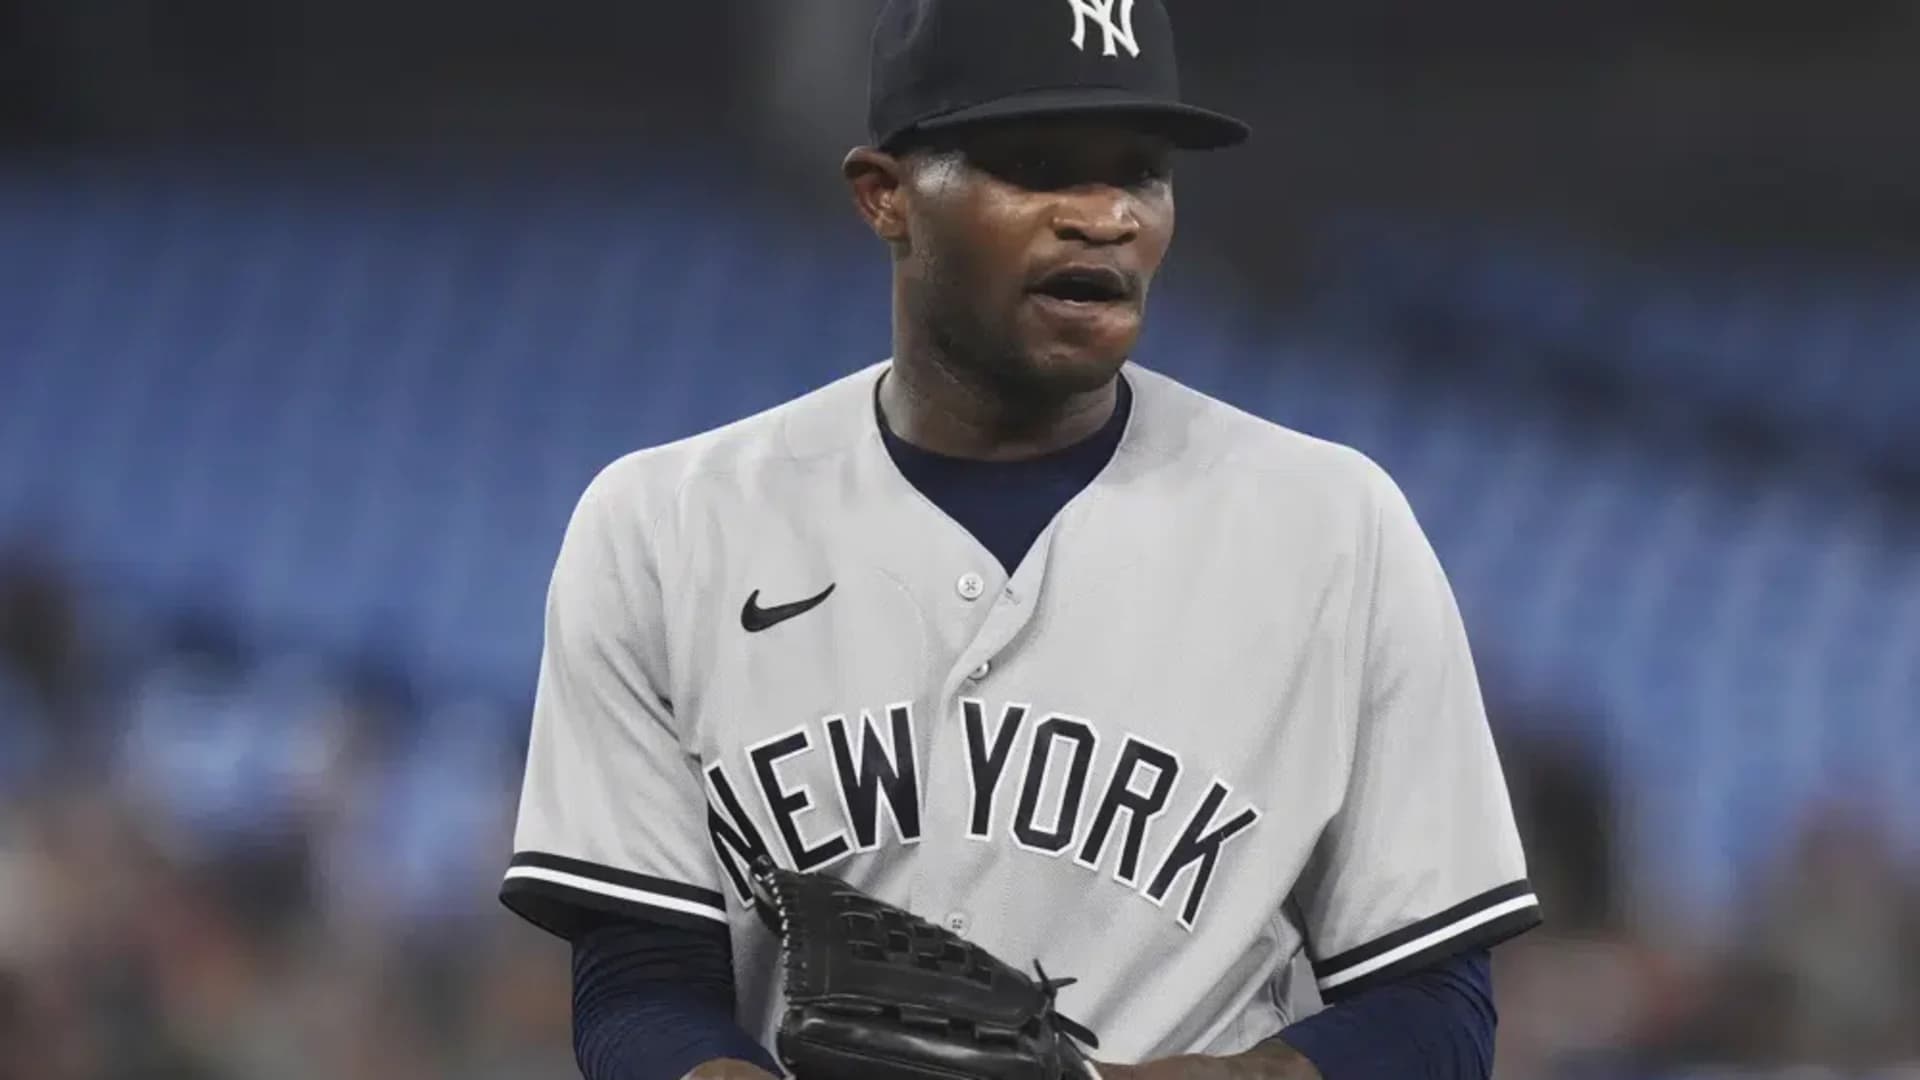 Yankees pitcher Germán suspended 10 games by MLB for using foreign substance